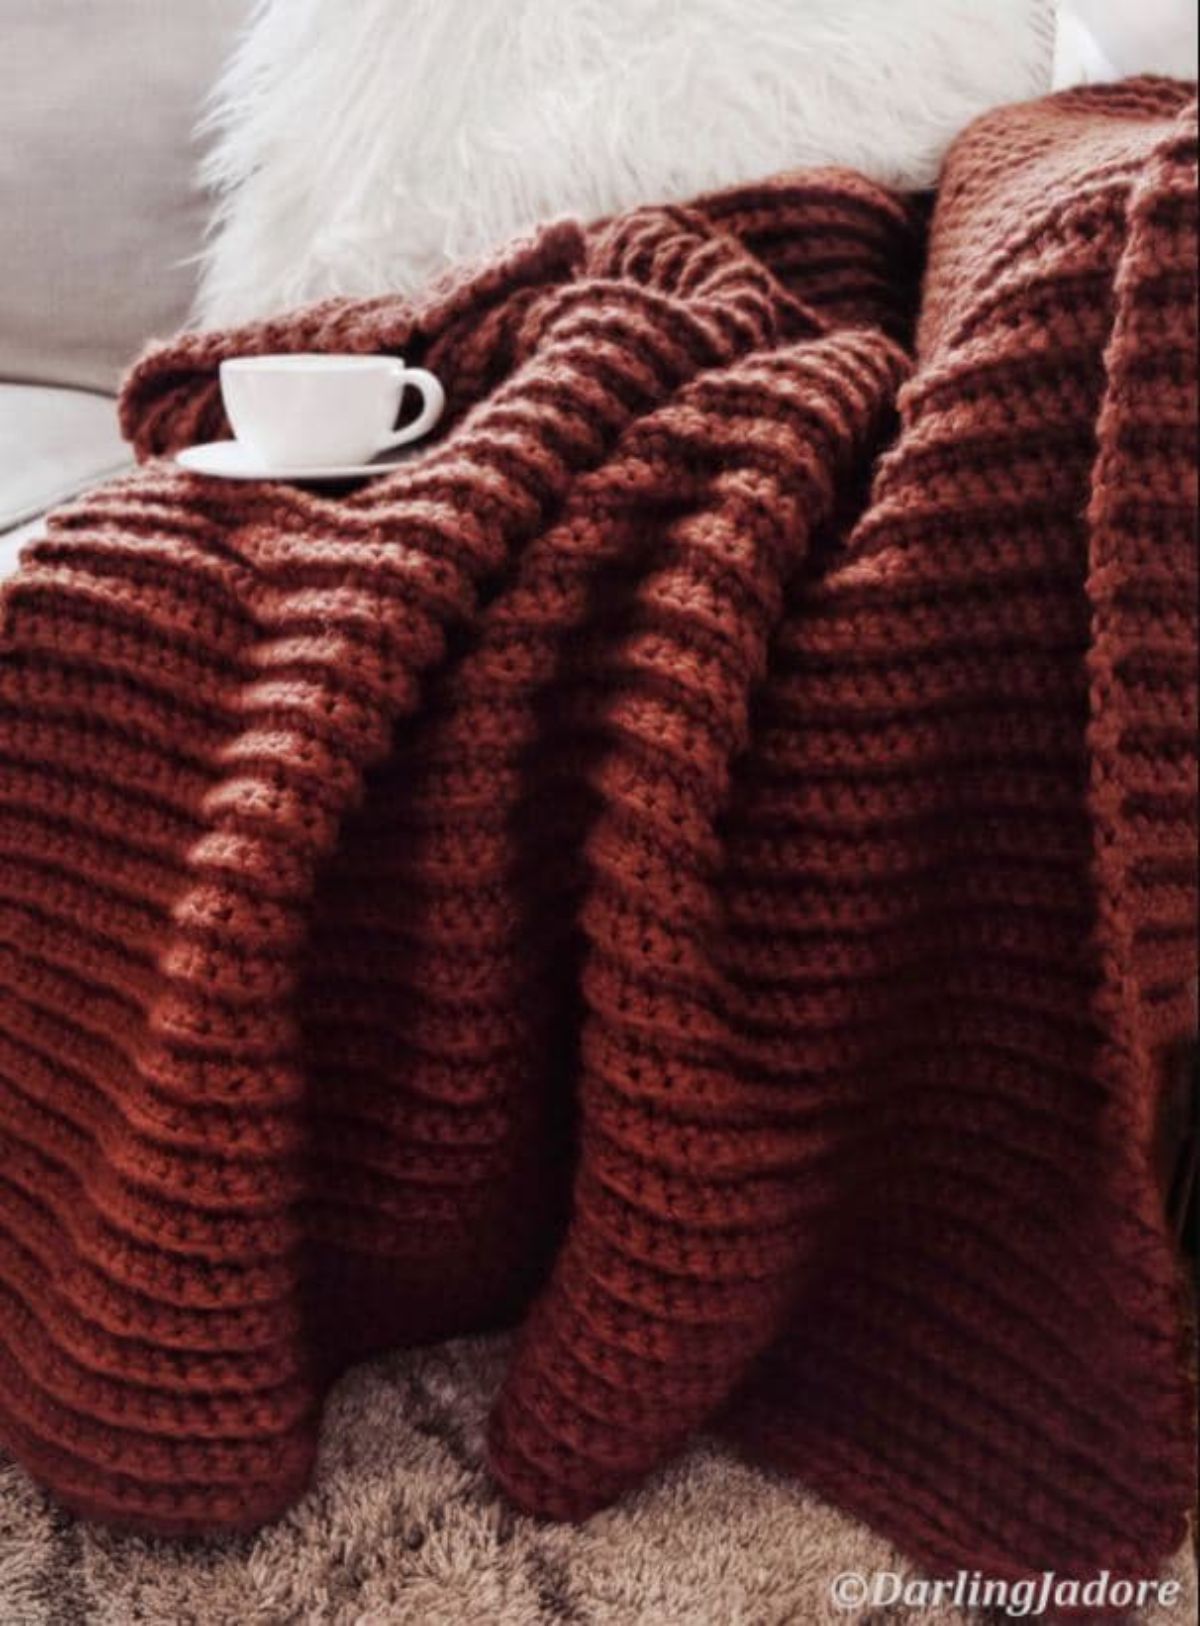 Dark orange chunky crochet blanket draped over a cream sofa with a white cup and saucer balanced on the blanket.